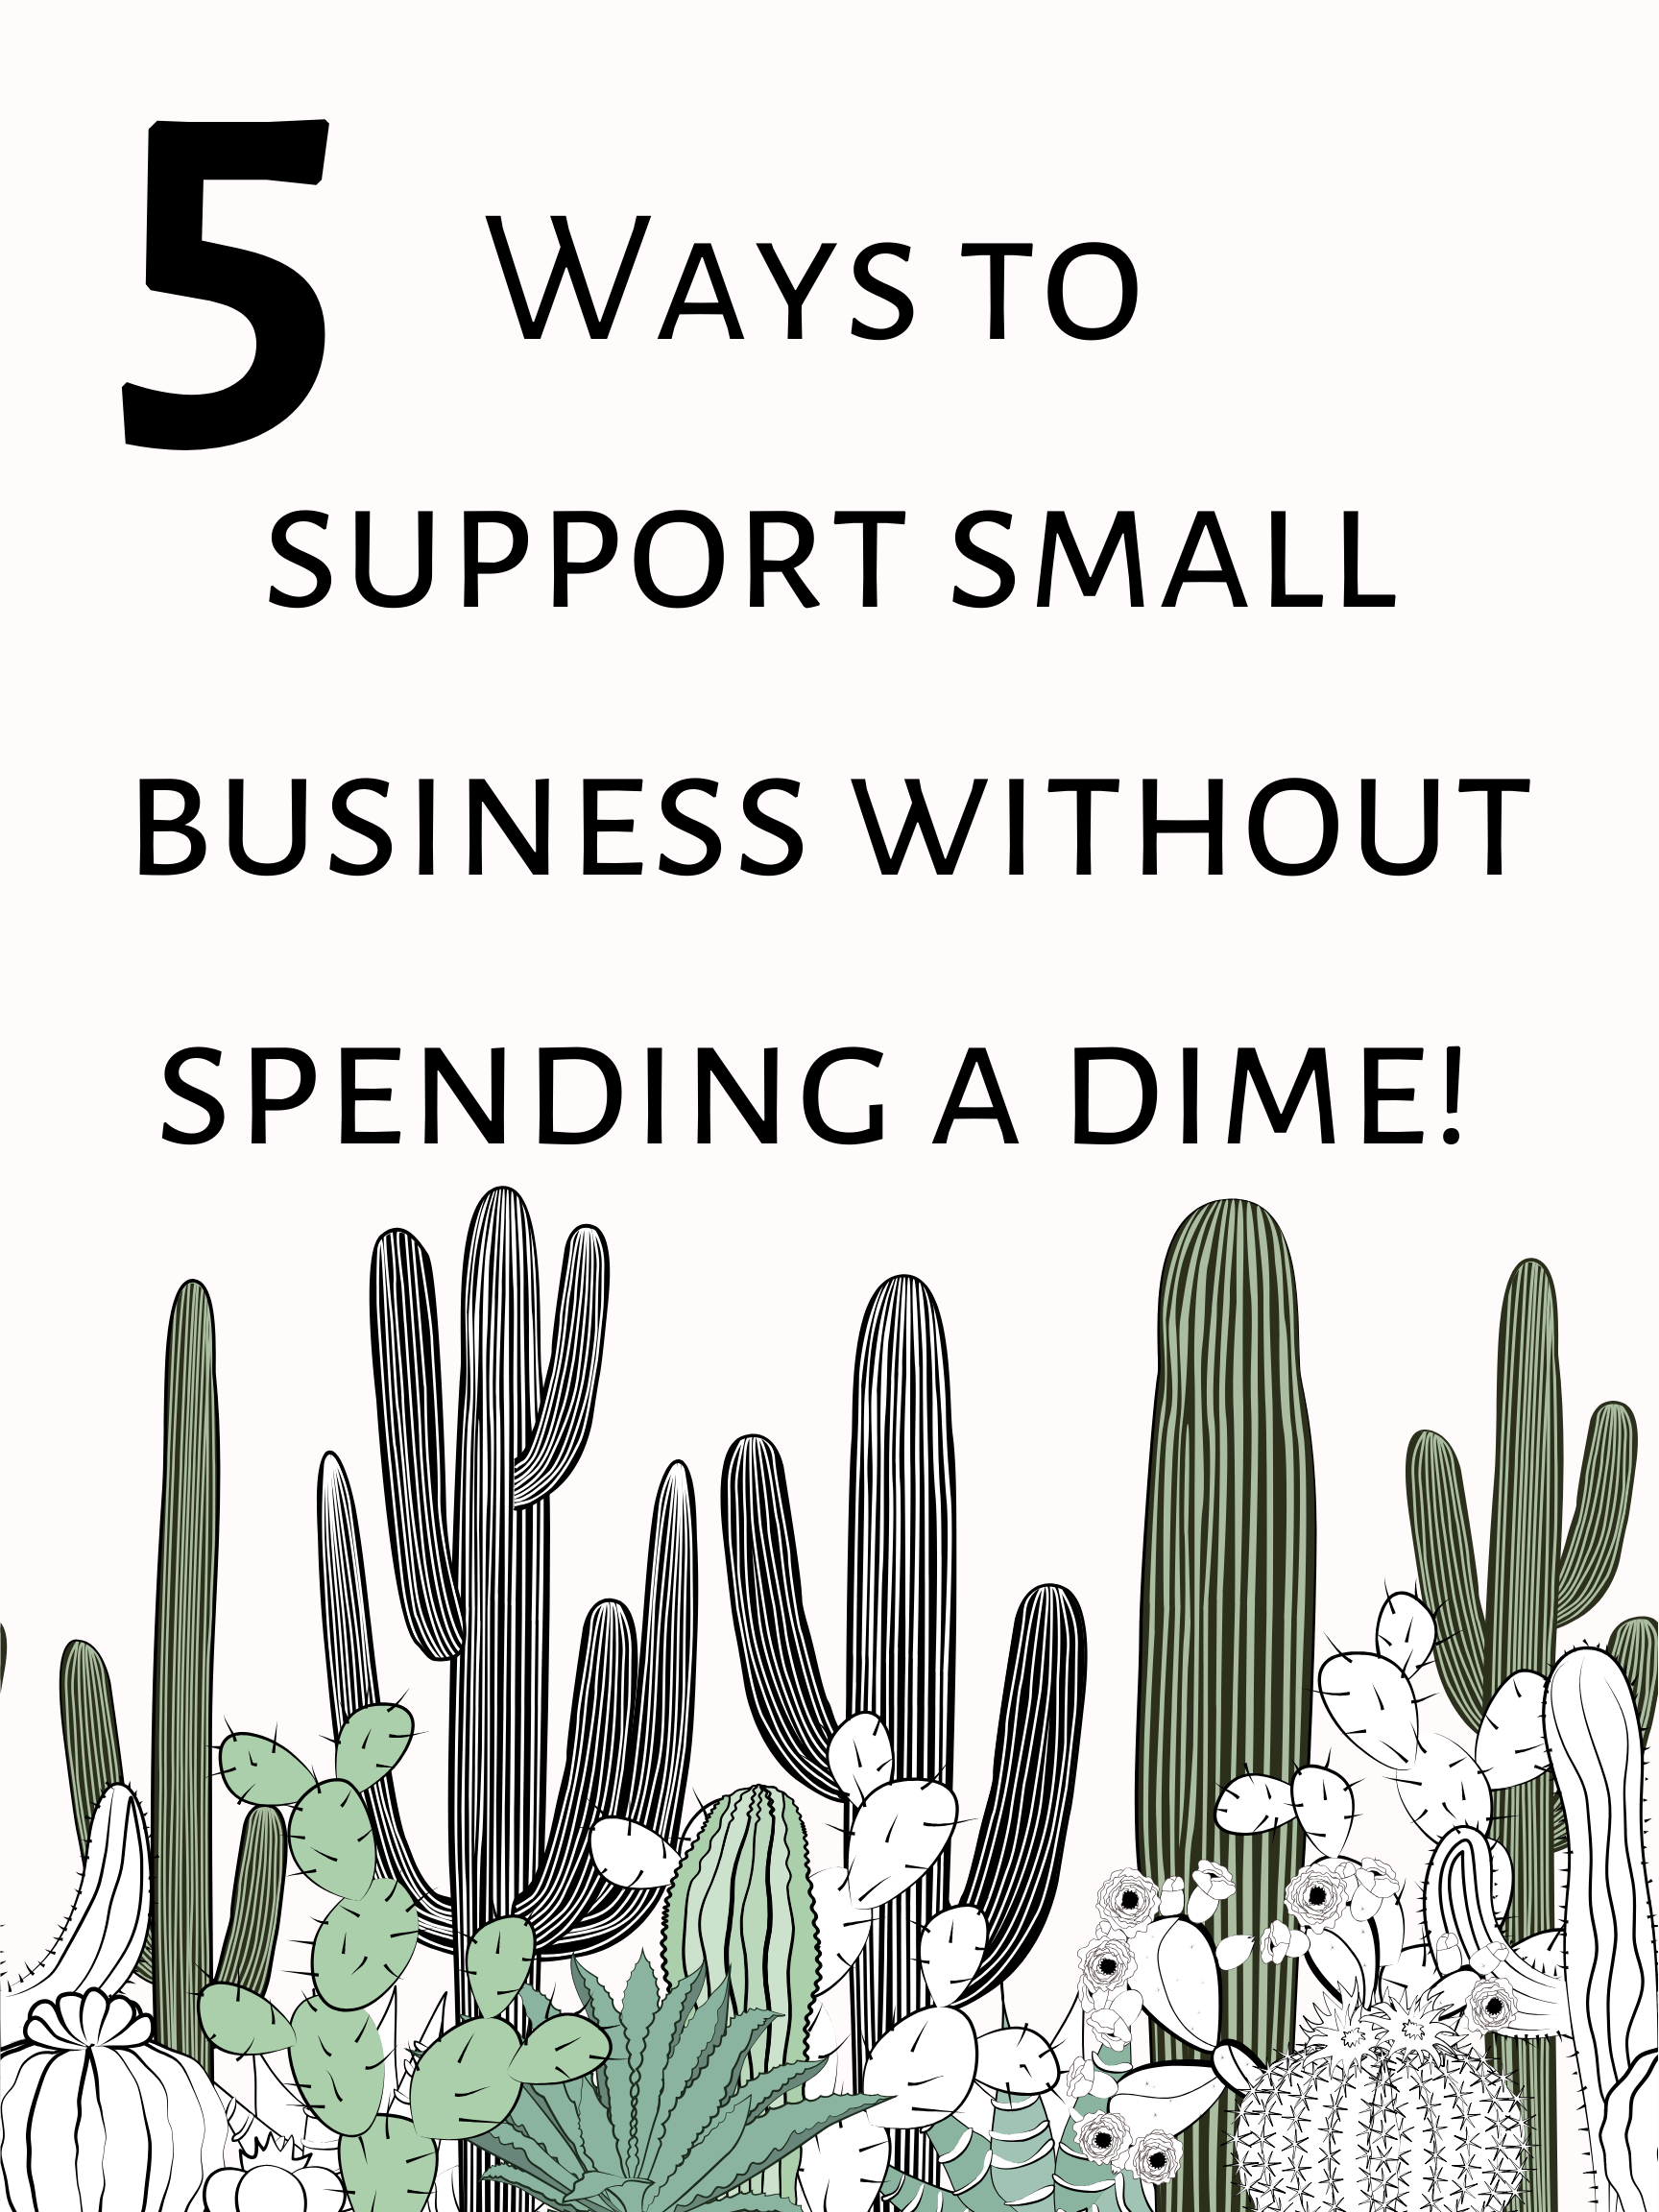 5 Ways to Support Small Business for FREE